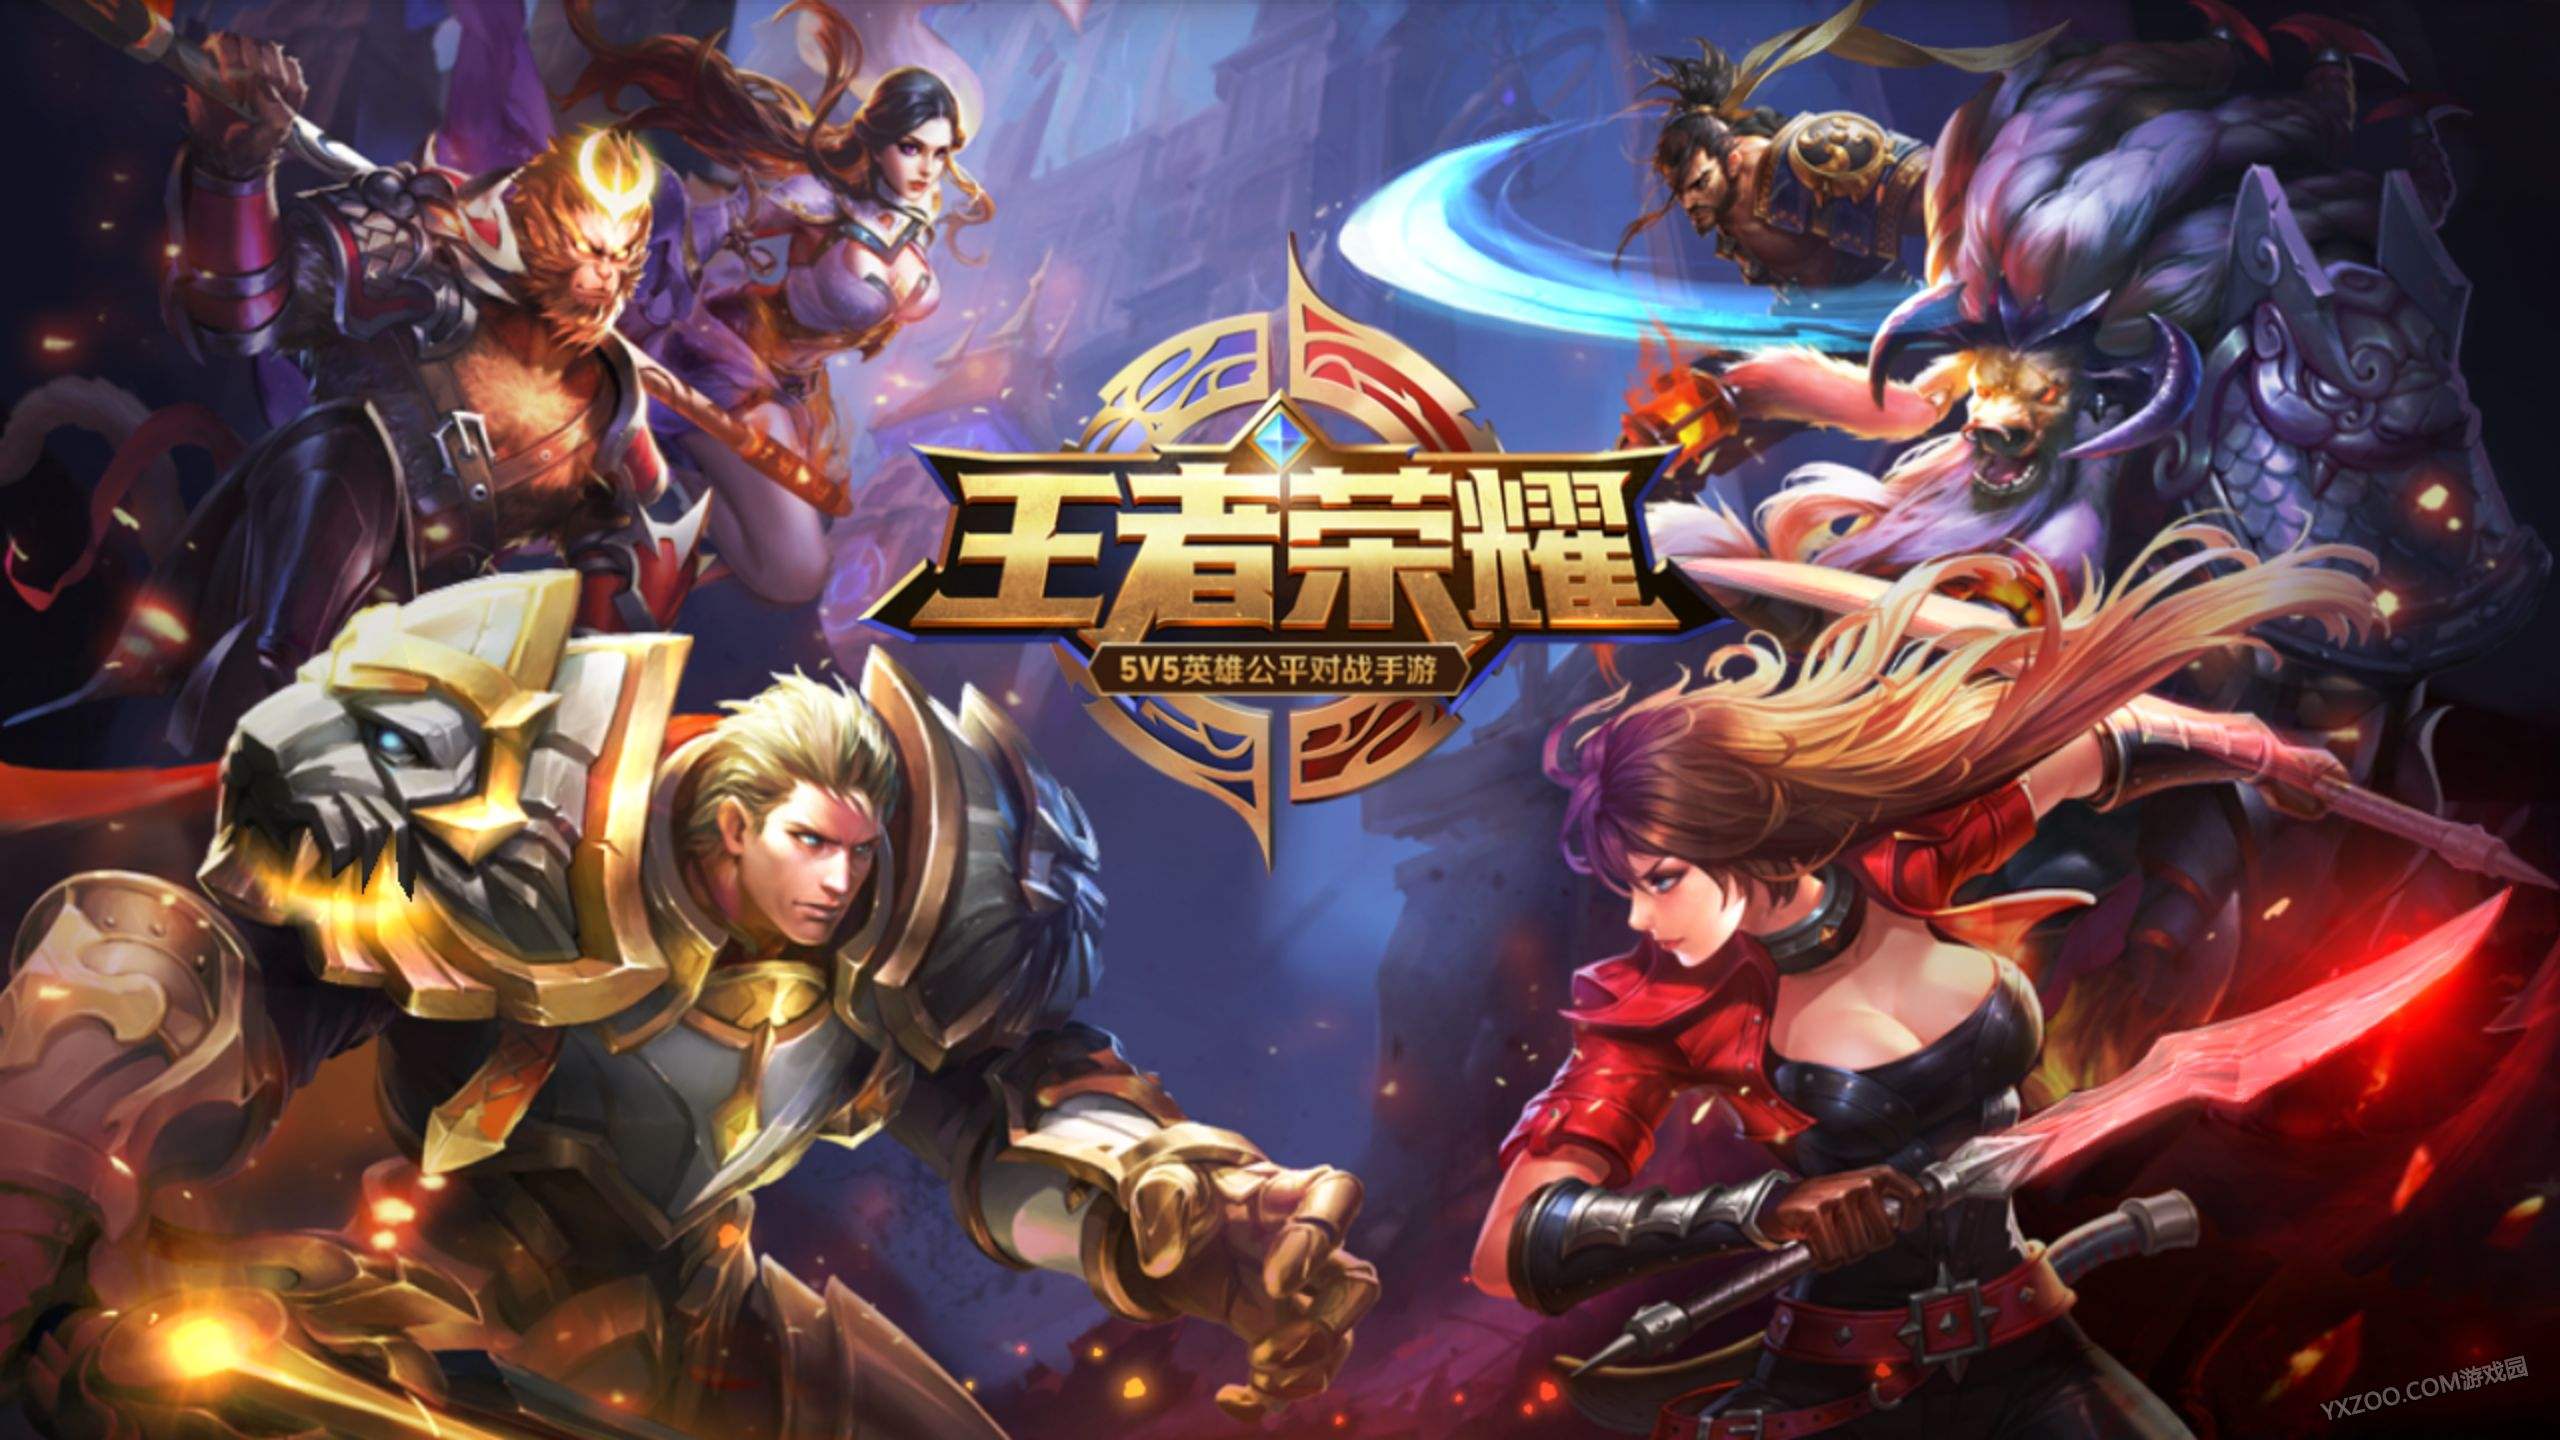 A chinese mobile game with over 100 million users per day